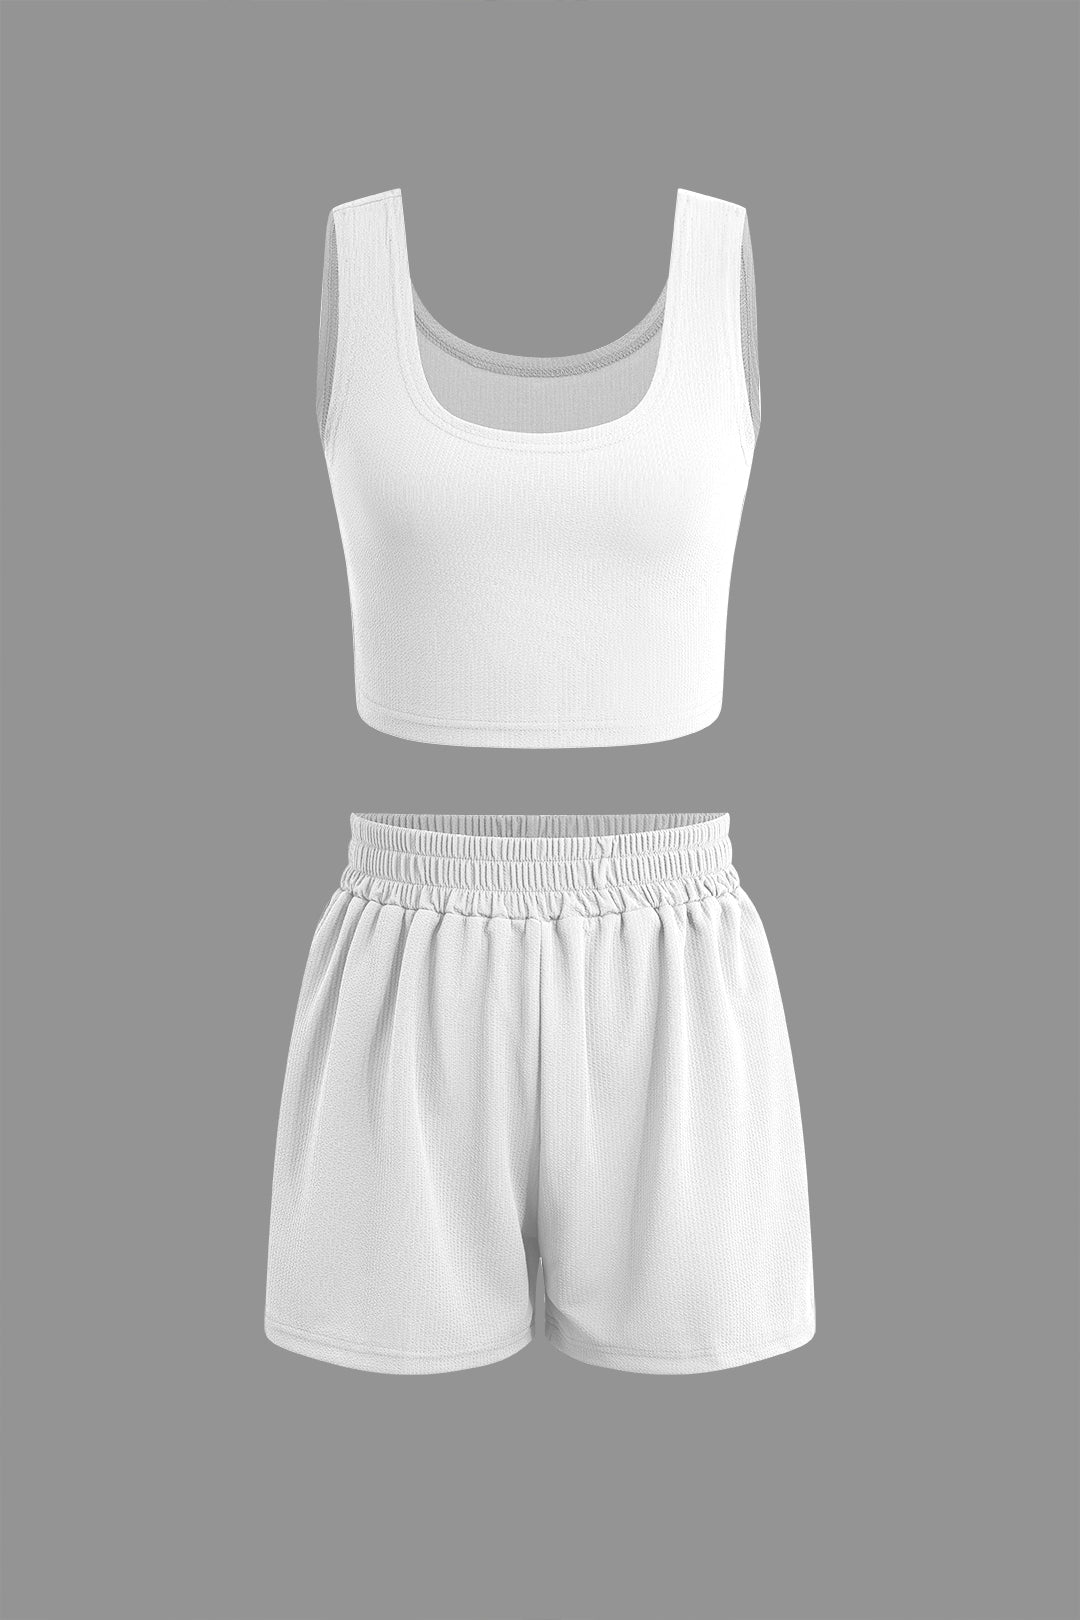 Basic Solid Crop Tank Top And Short Sets